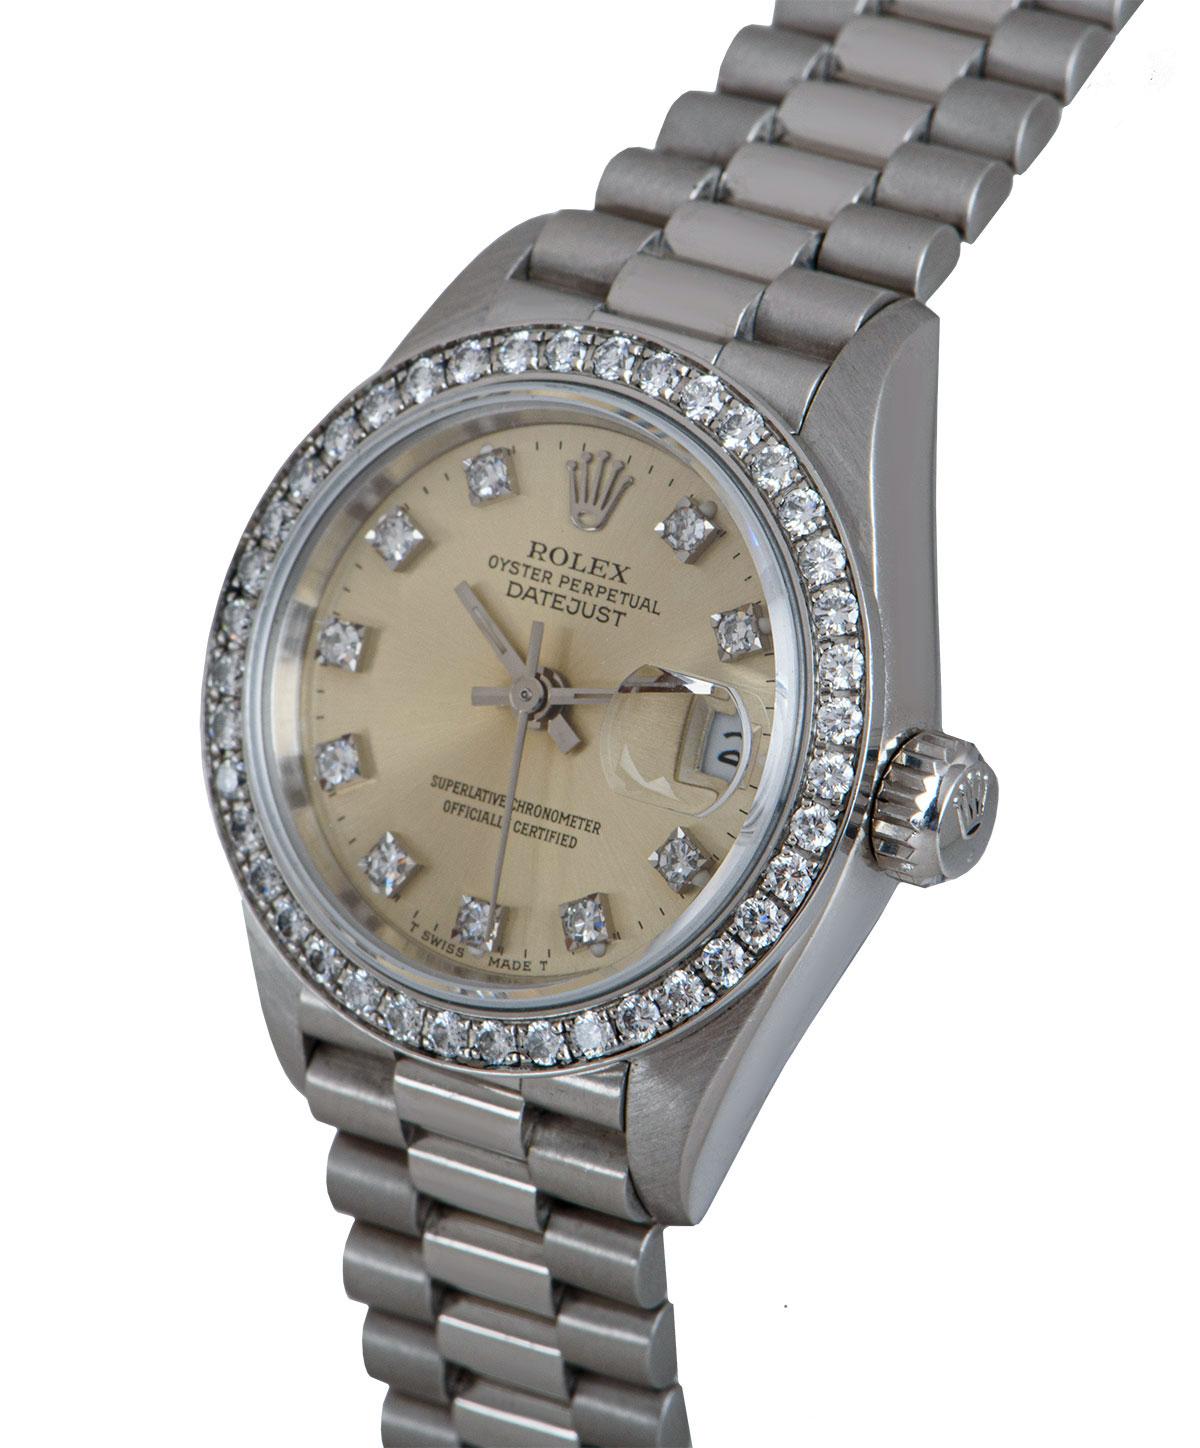 A 26 mm Platinum Oyster Perpetual Datejust Ladies Wristwatch, silver dial set with 10 applied round brilliant cut diamond hour markers, date at 3 0'clock, a fixed platinum bezel set with 40 round brilliant cut diamonds, a platinum president bracelet